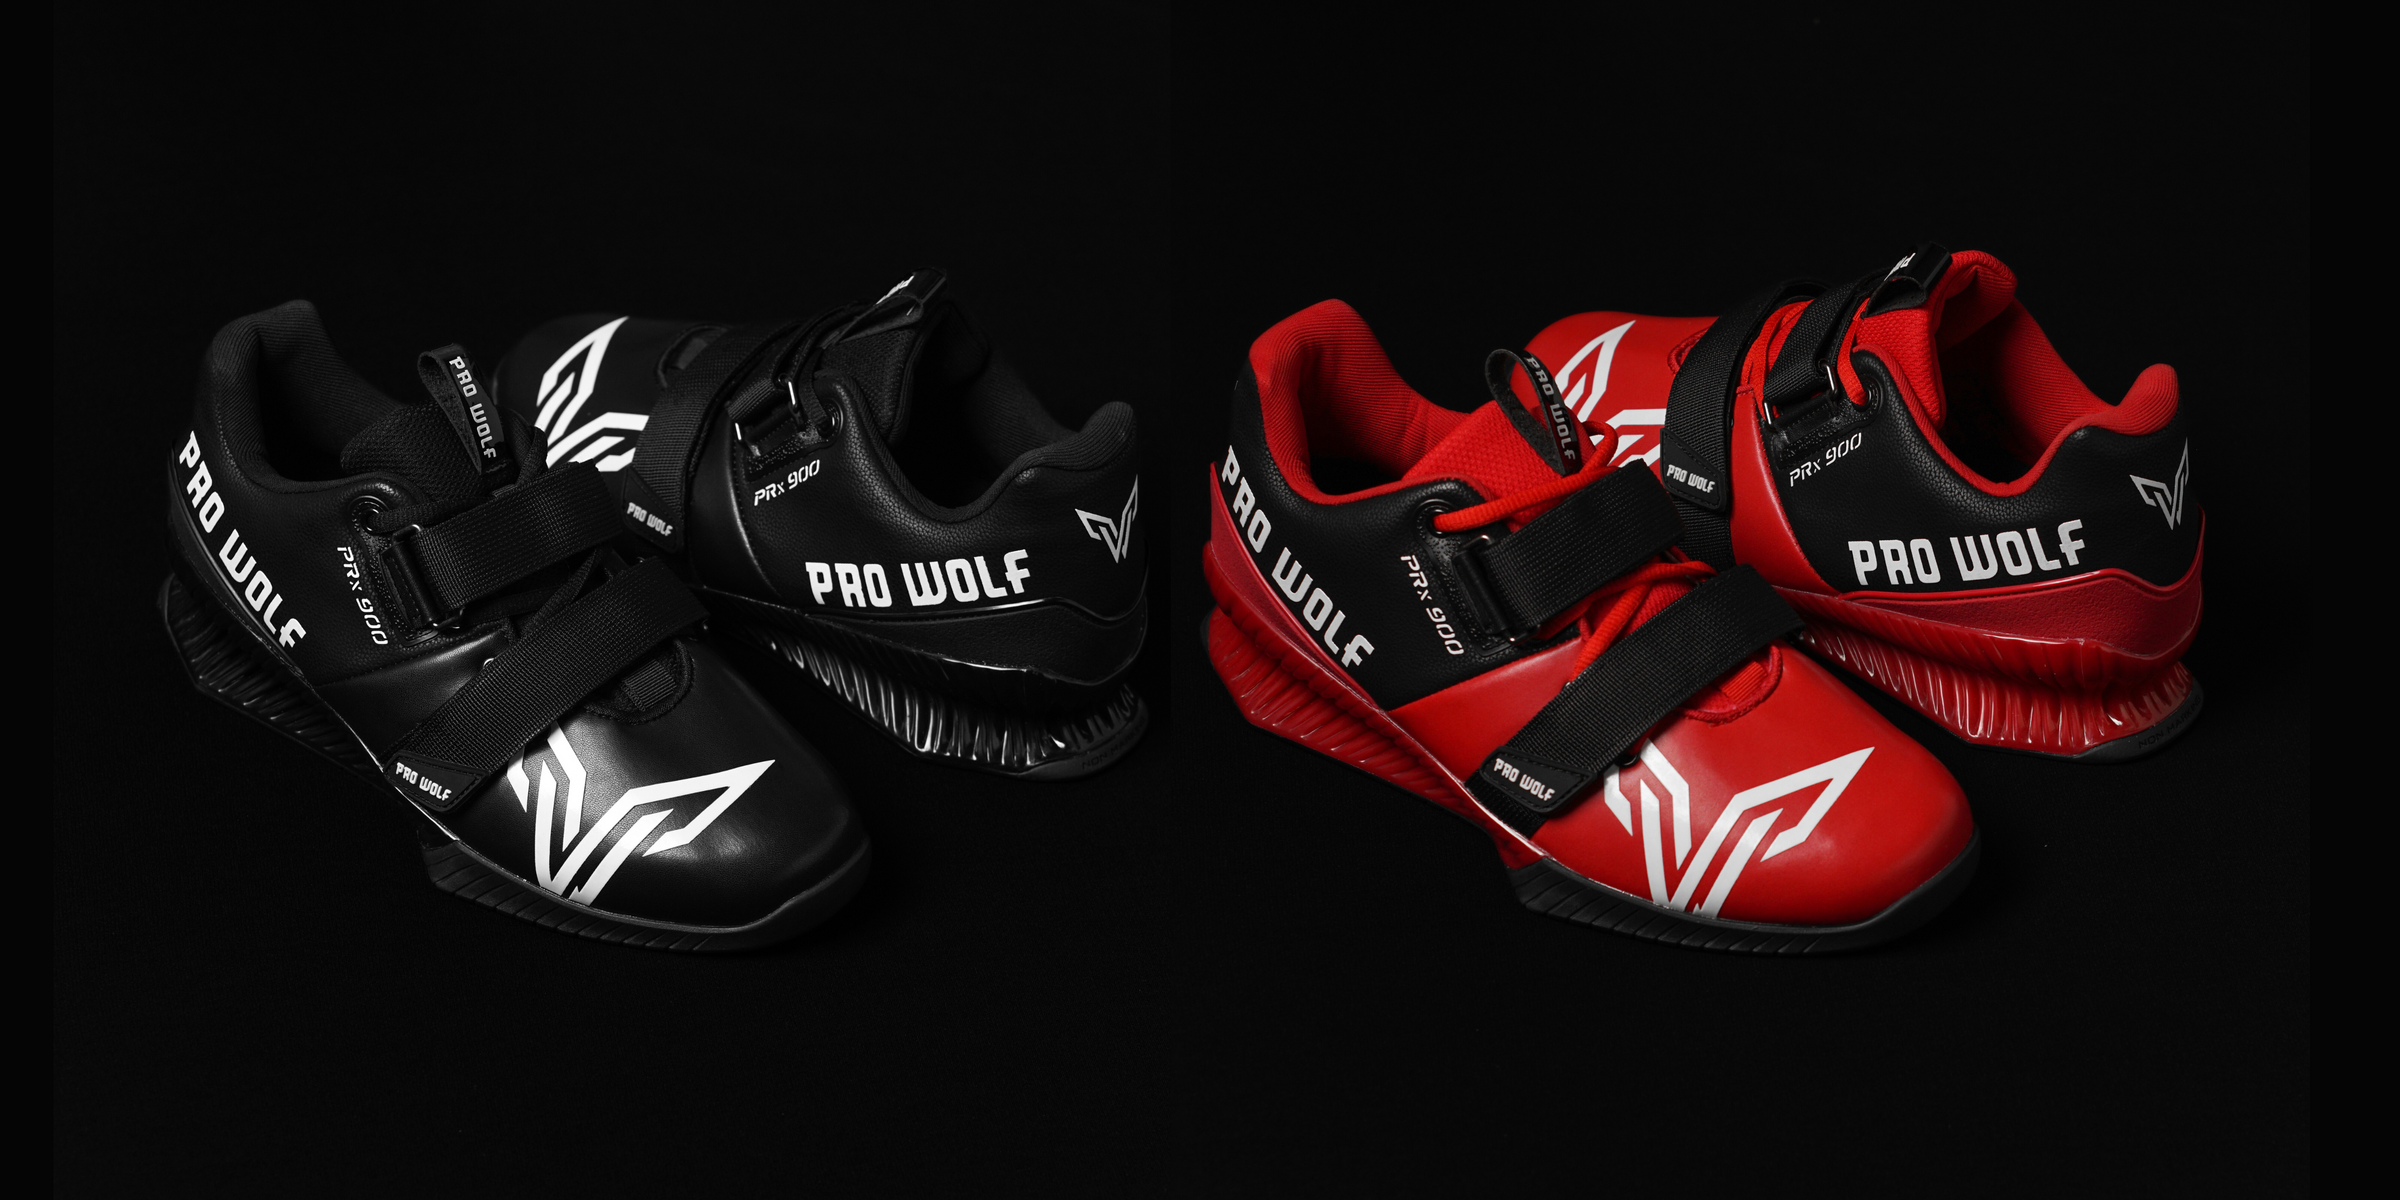 Pro wolf shoes red and black variations 